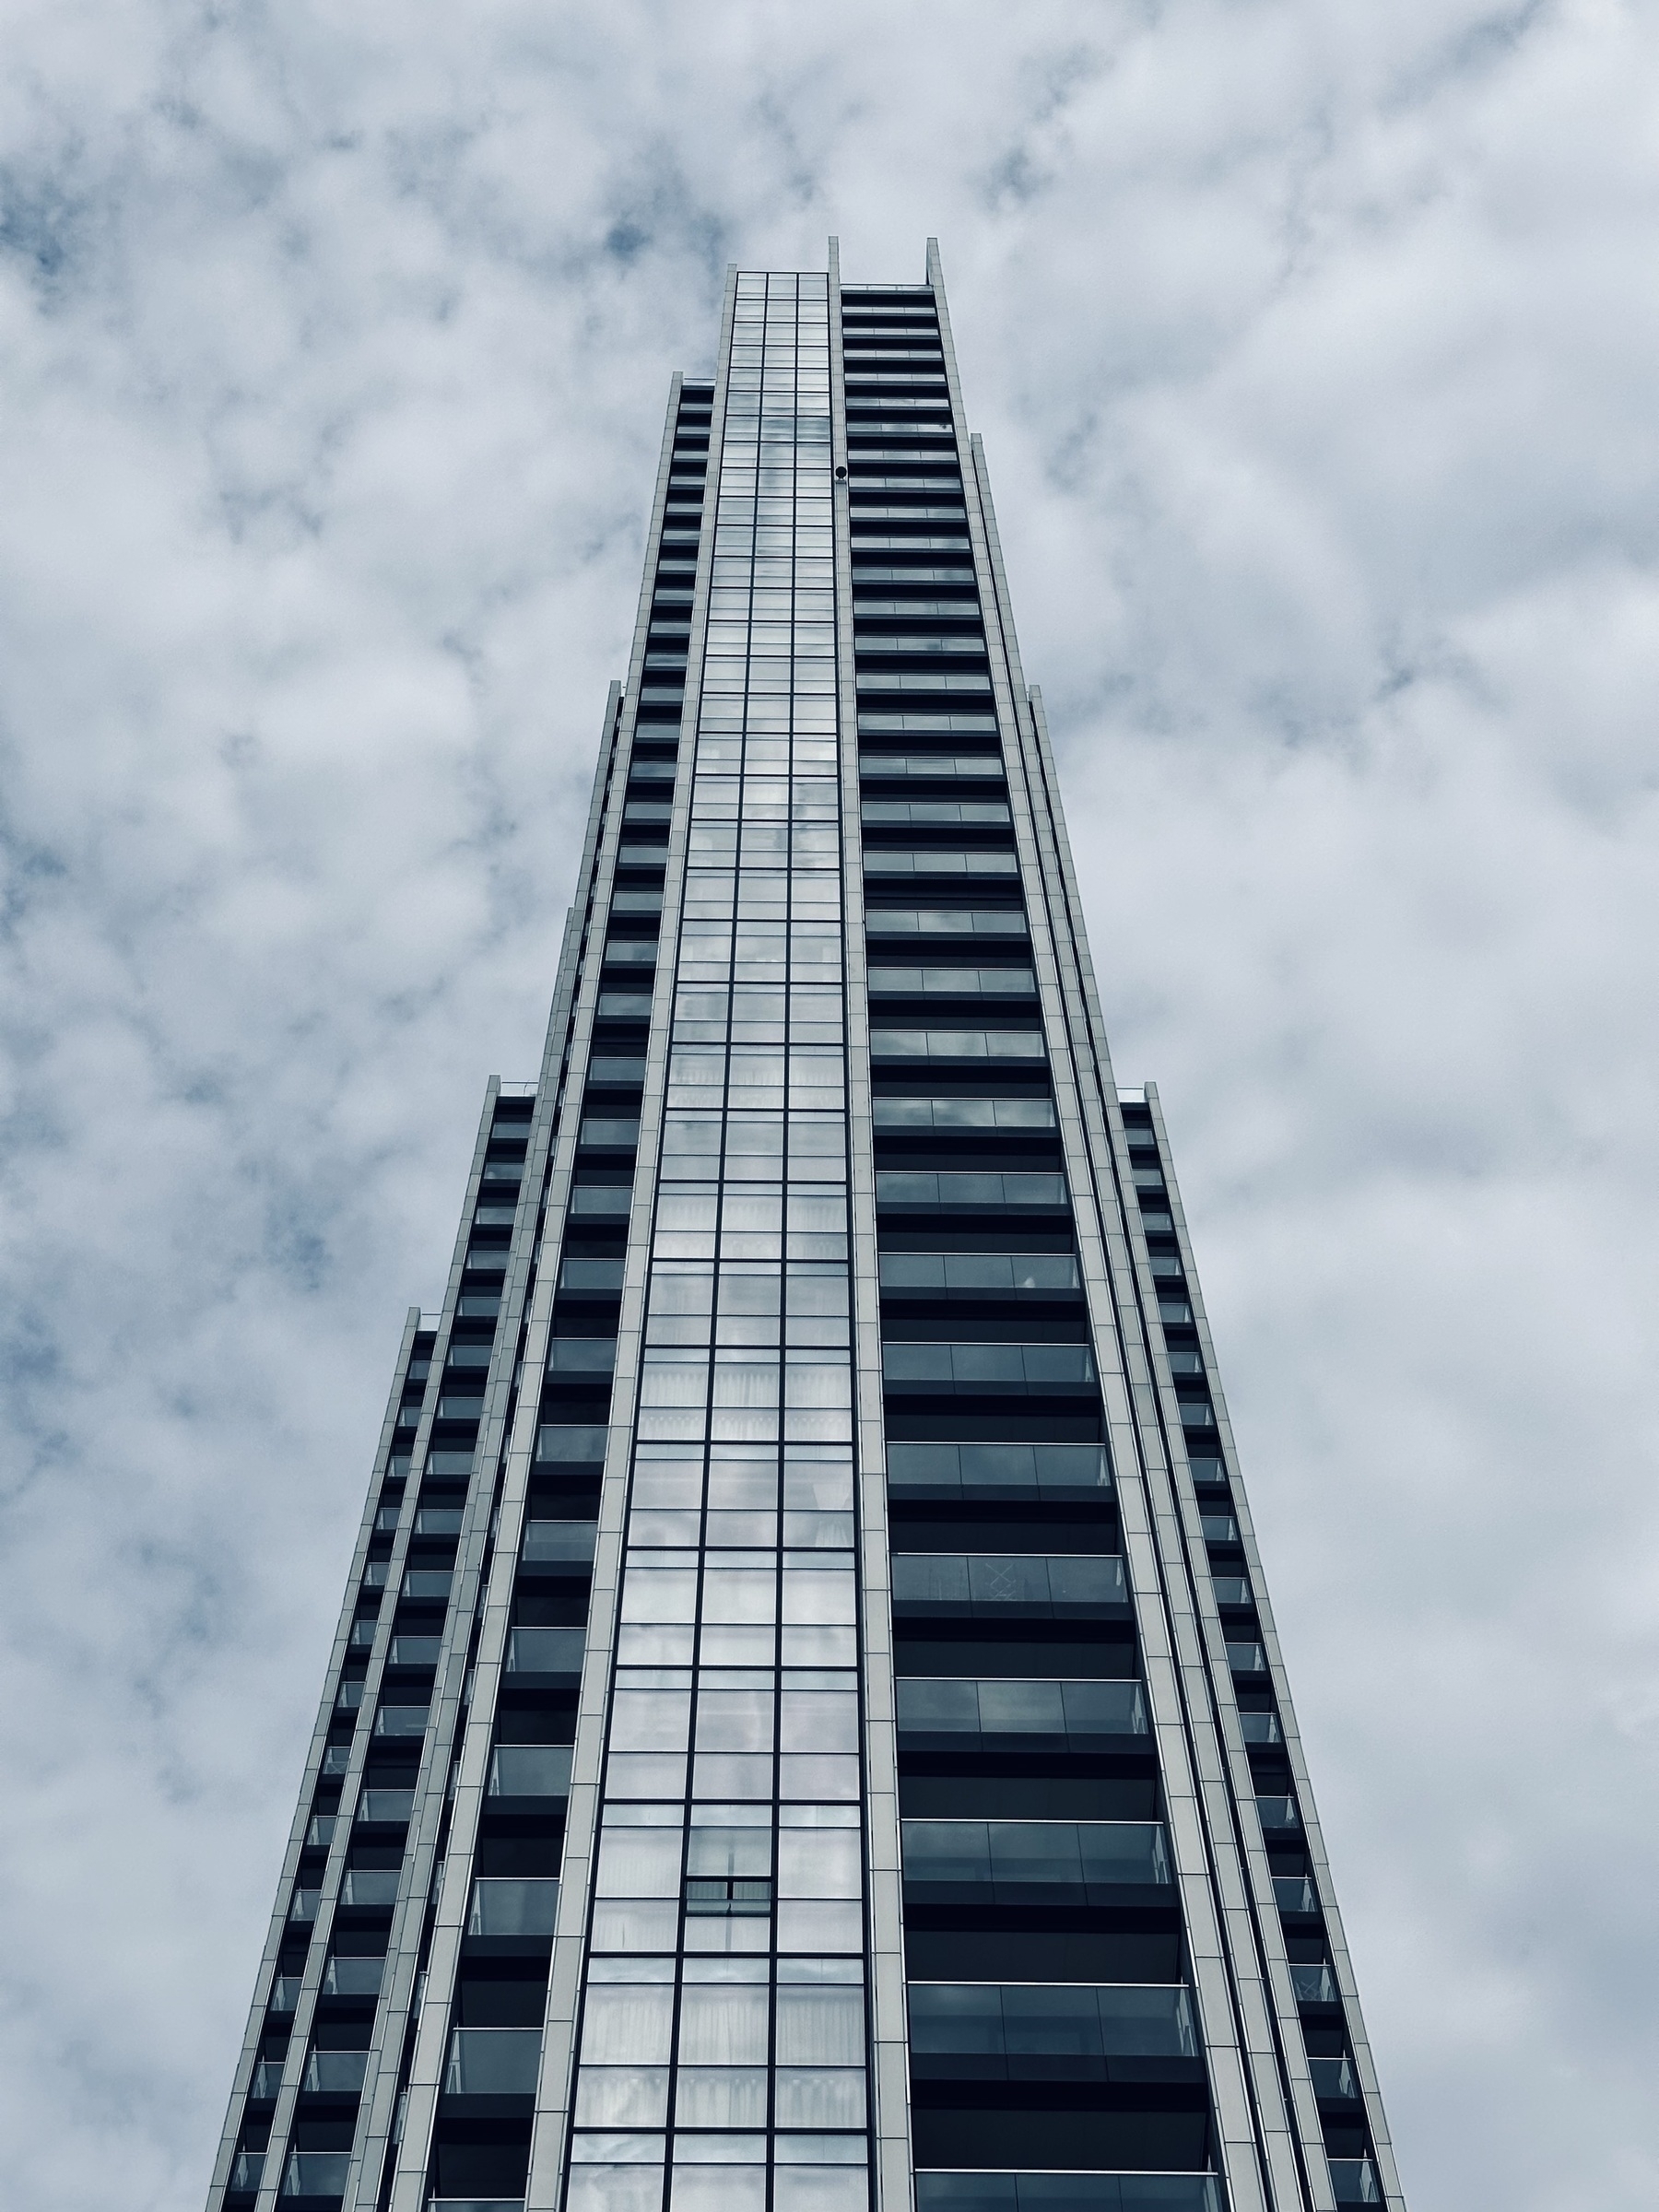 A tall building with balconies reaching up in to a cloudy sky.